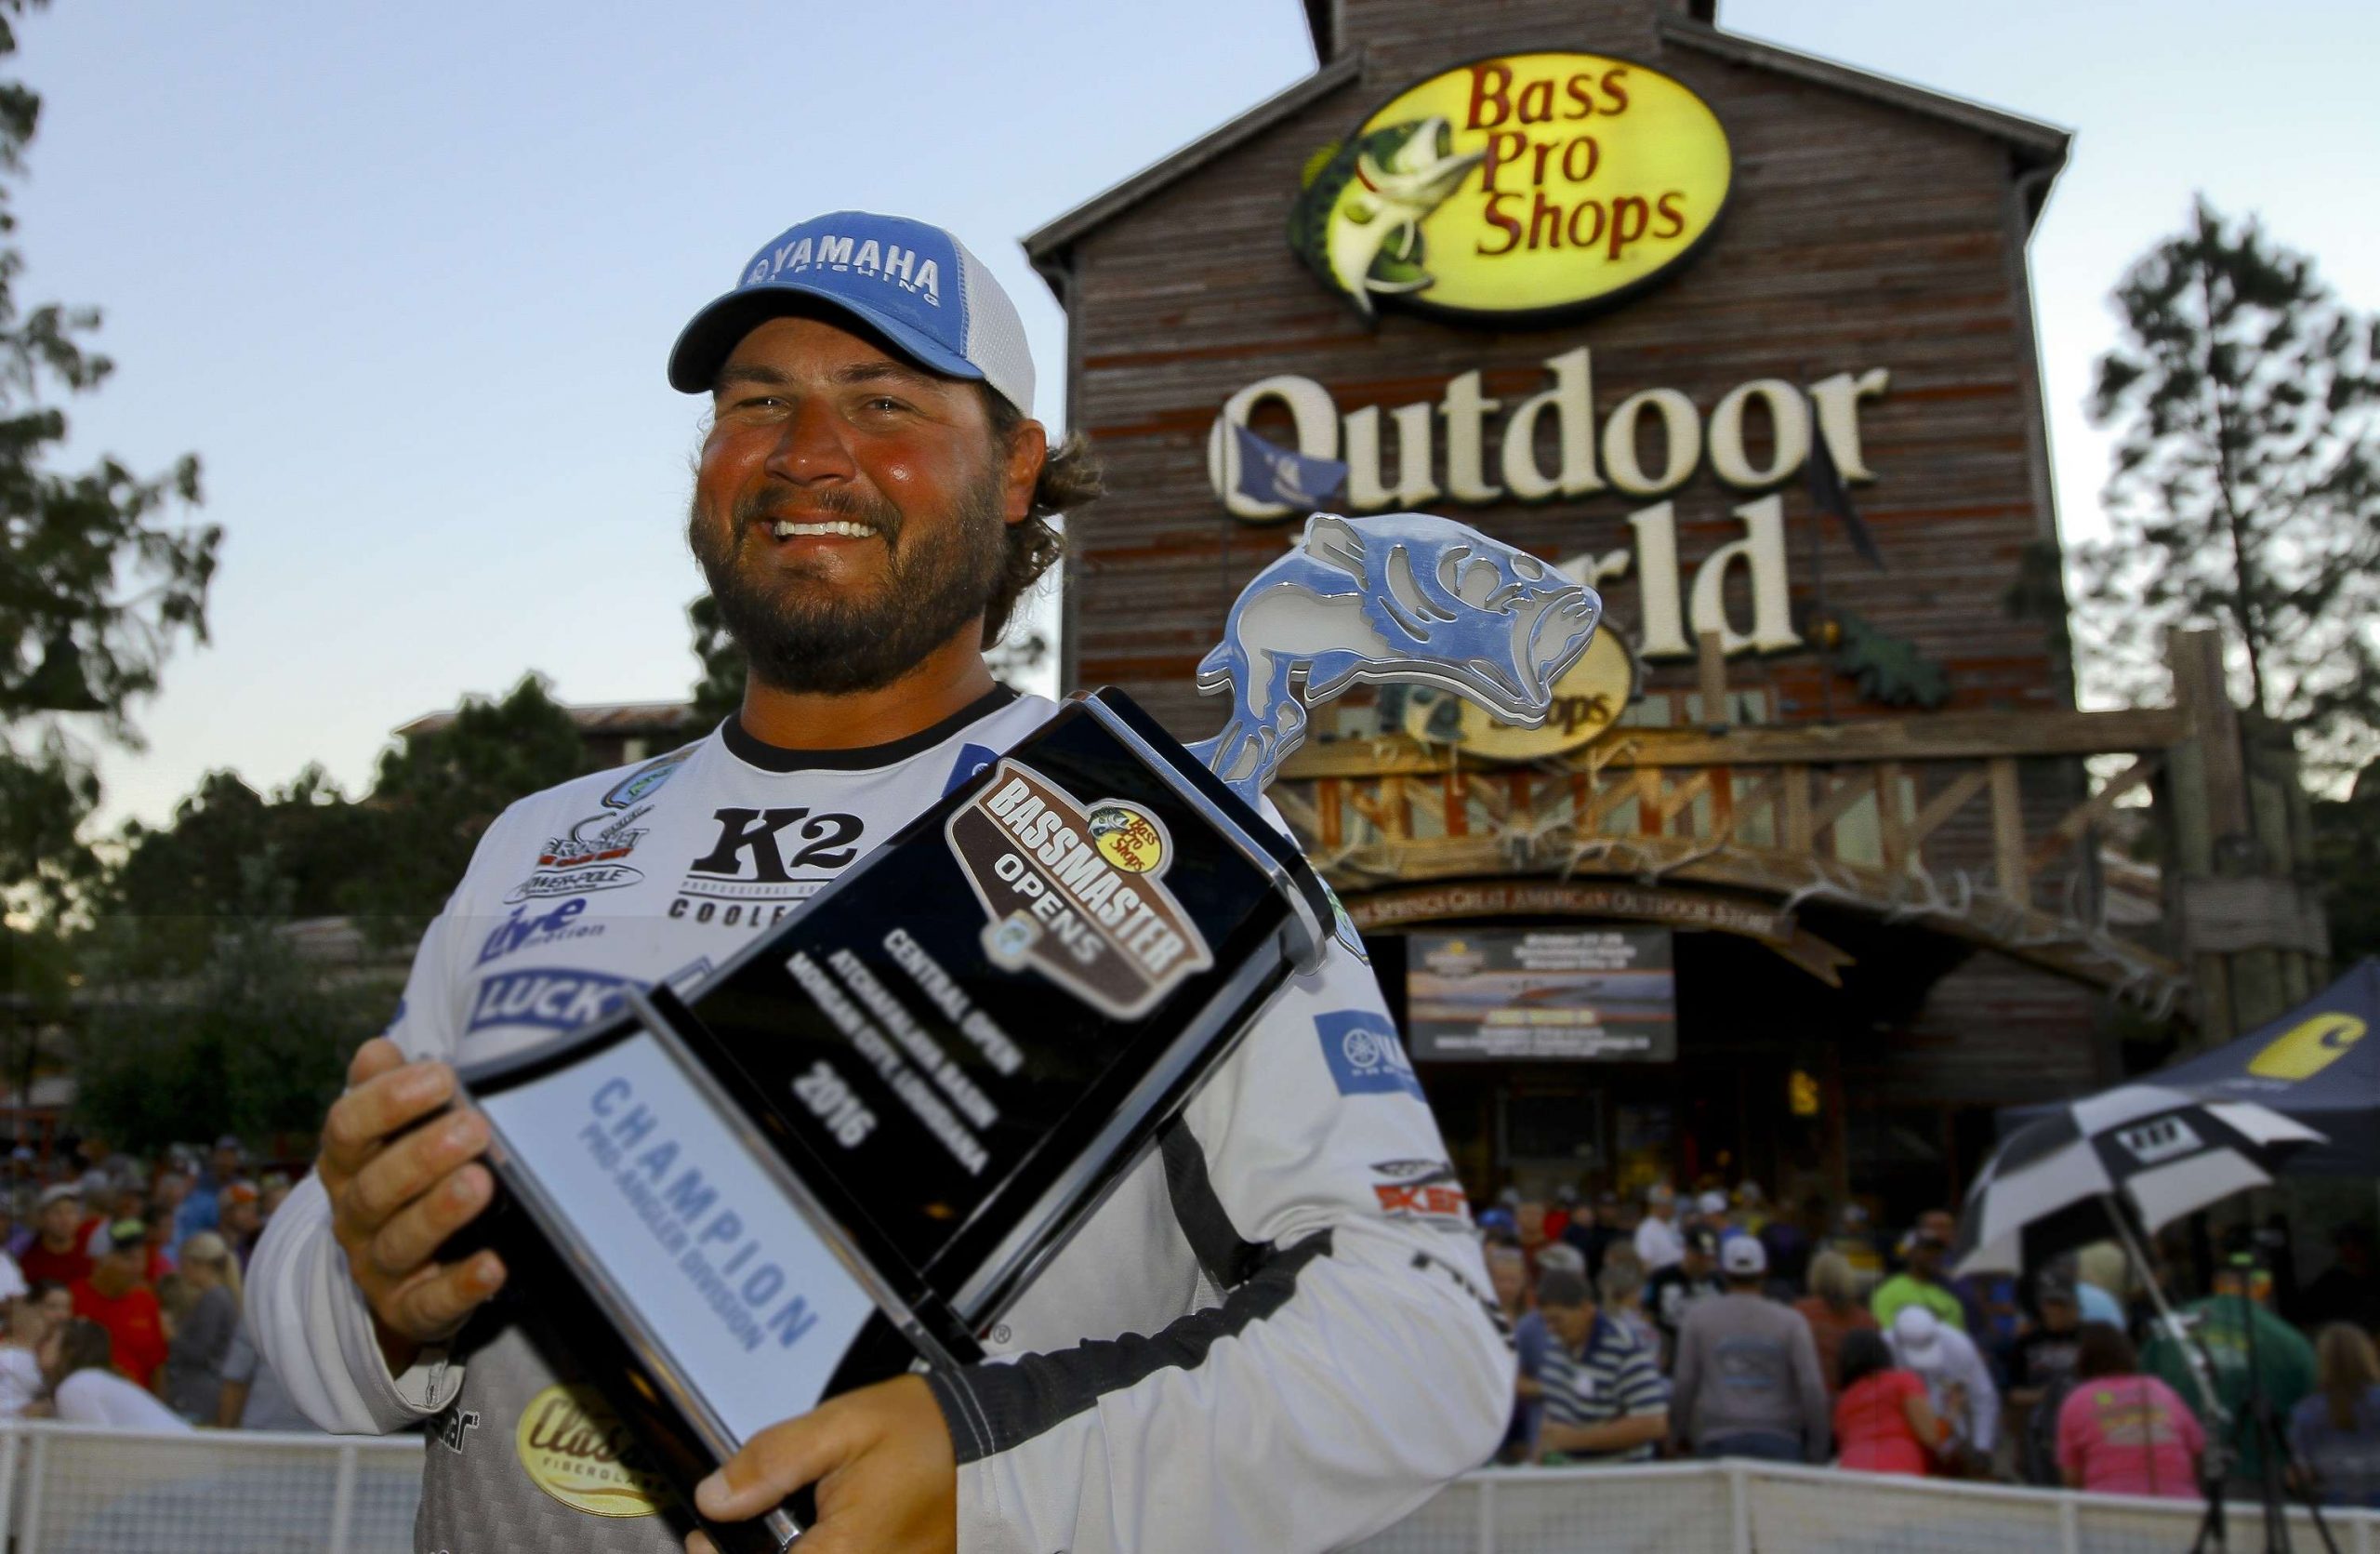 <h4>Cliff Crochet</h4>
Pierre Part, Louisiana<br>
Qualified via the Bass Pro Shops Bassmaster Central Open on Atchafalaya Basin. 